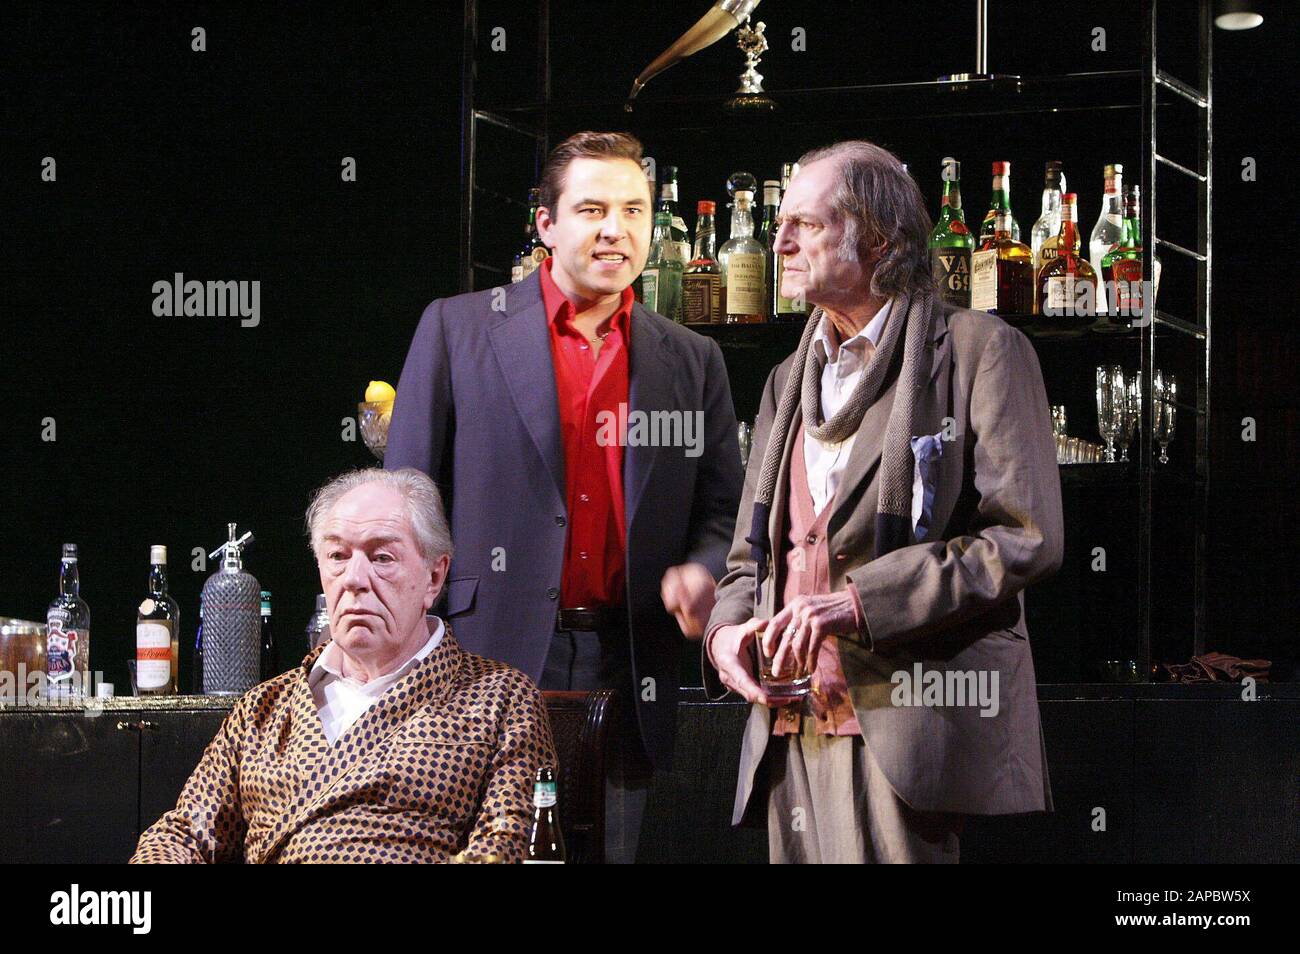 Michael Gambon (Hirst), David Walliams (Foster) and David Bradley (Spooner) in NO MAN'S LAND by Harold Pinter directed by Rupert Goold at the Duke of York's Theatre, London WC2 in 2008. Michael John Gambon, born in Cabra, Dublin in 1940, moved to London at the age of 6 and became a British citizen. Knighted in 1998. Multi-award-winner, including 3 Oliviers and 4 BAFTAs. Stock Photo